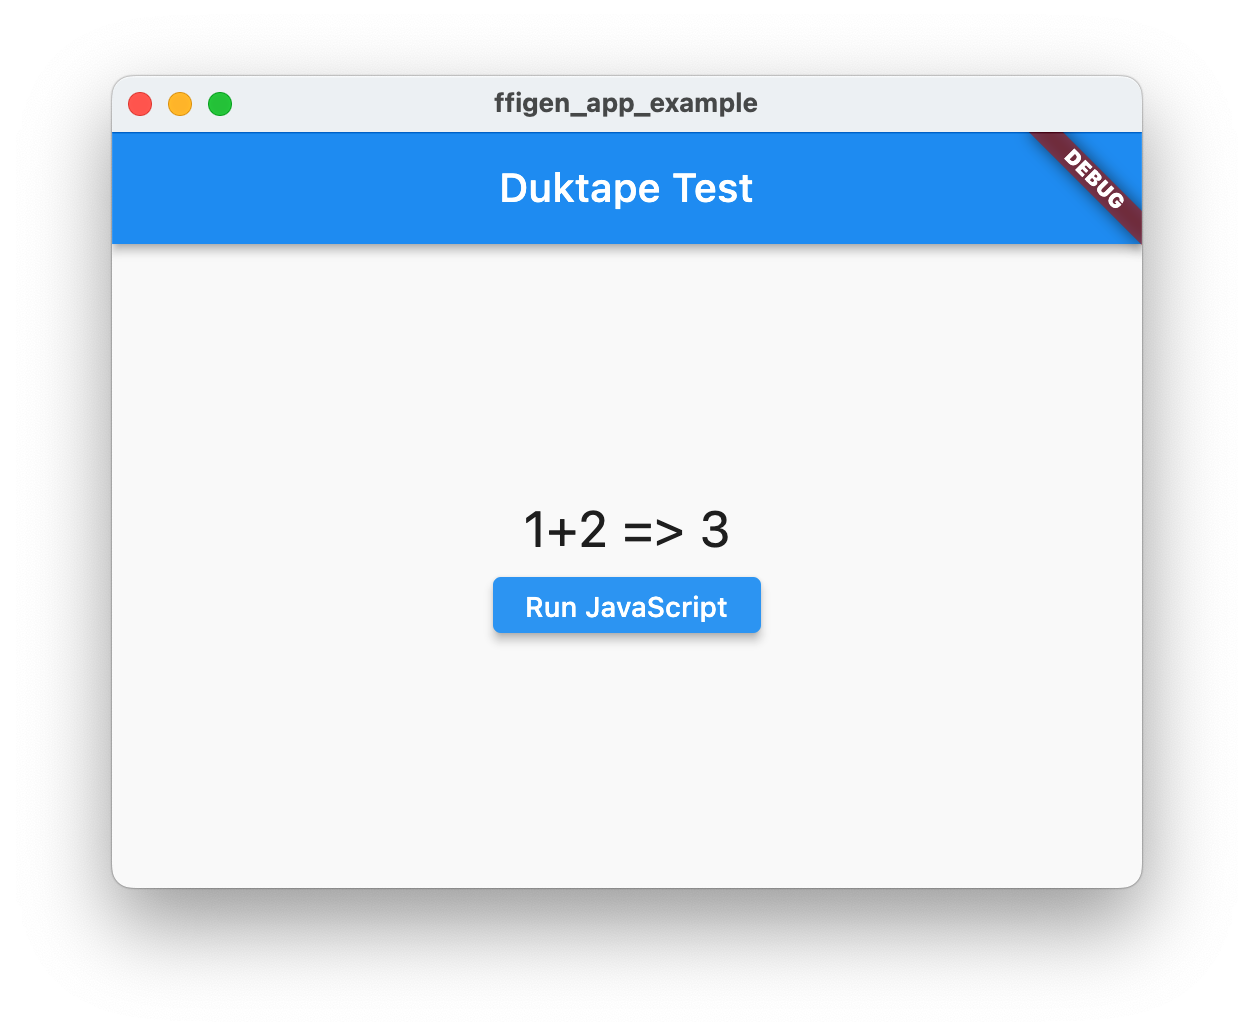 Showing Duktape JavaScript output in a macOS application